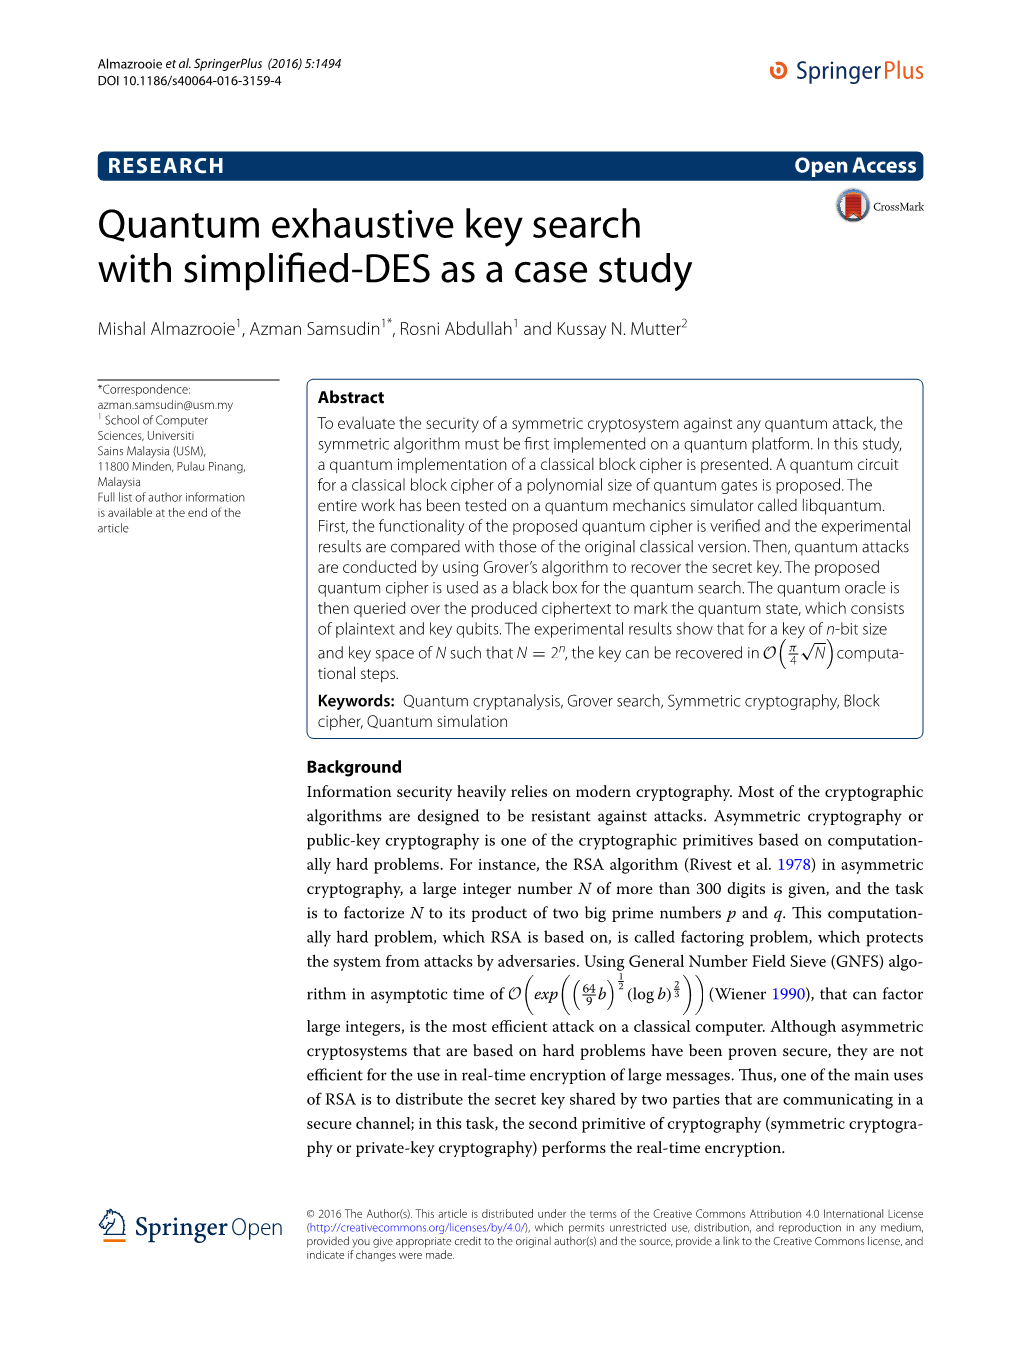 Quantum Exhaustive Key Search with Simplified-DES As a Case Study